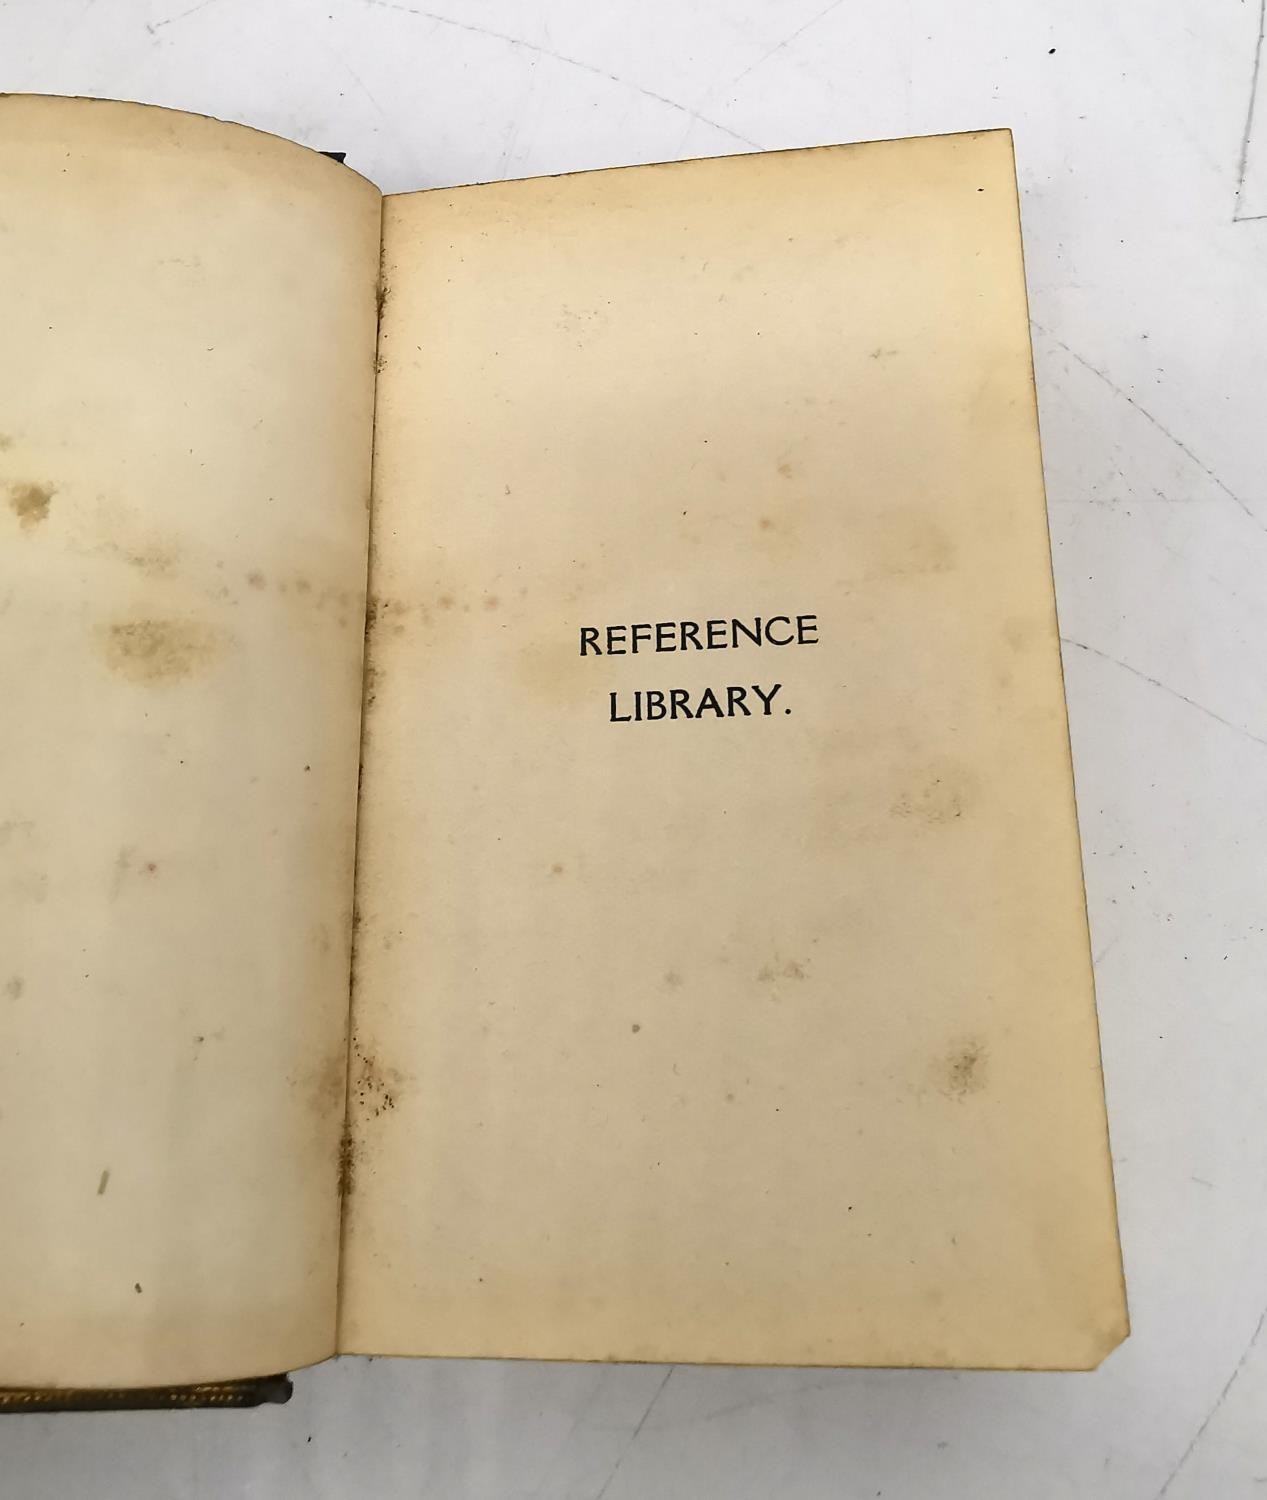 A signed Cartier Ltd. Miniature 'Reference Library' group of Cassell's dictionaries and Philips' - Image 33 of 37